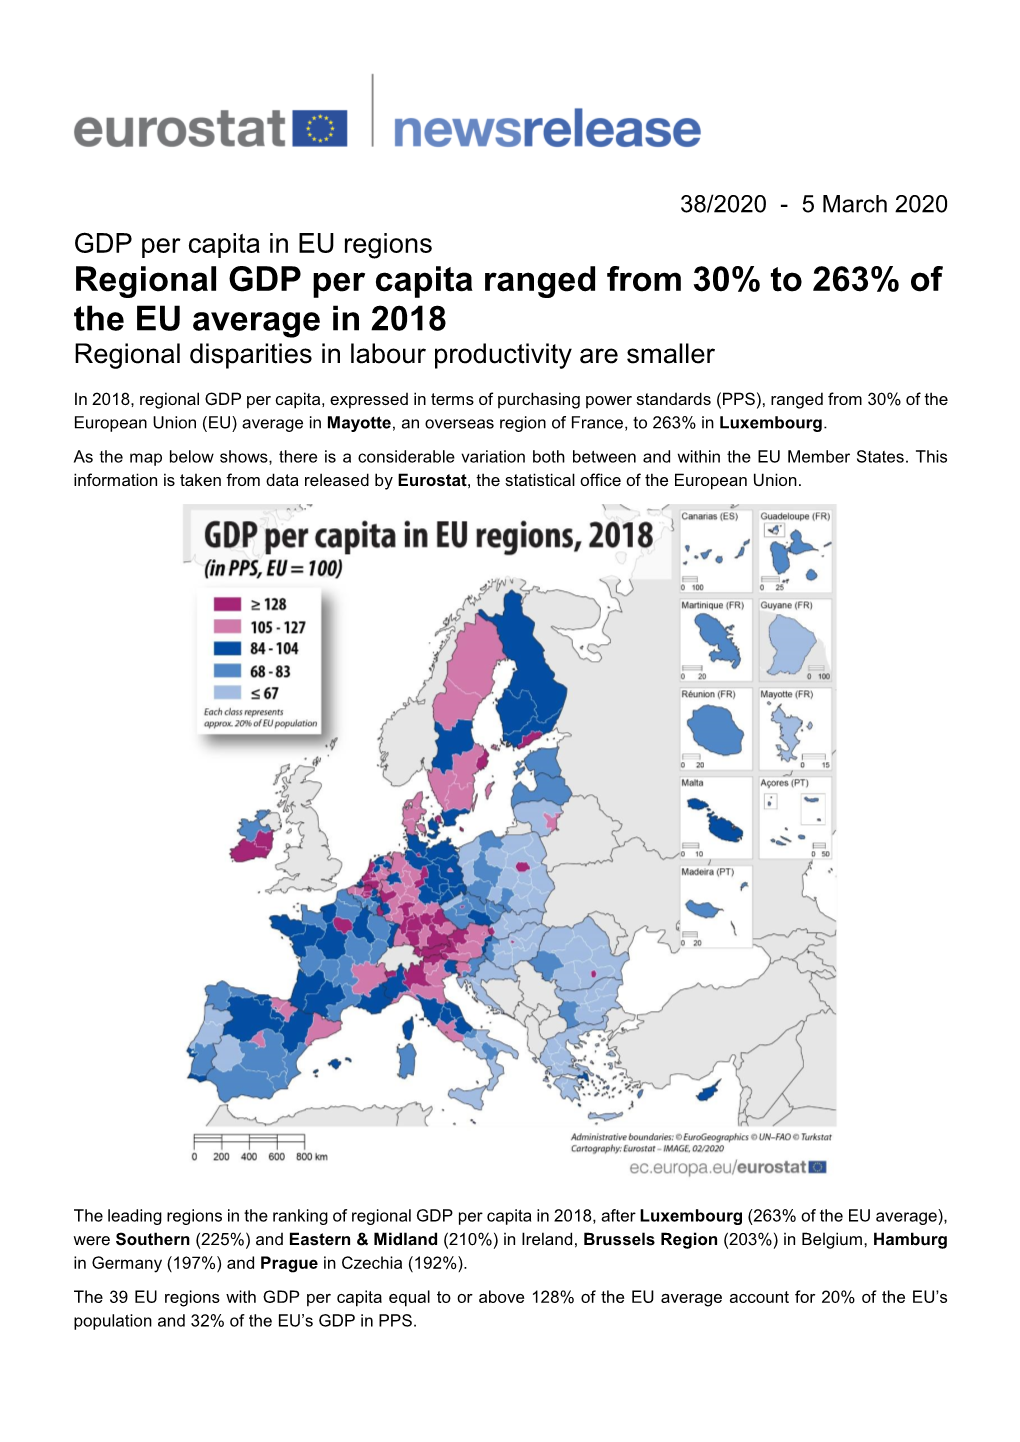 Regional GDP Per Capita Ranged from 30% to 263% of the EU Average in 2018 Regional Disparities in Labour Productivity Are Smaller